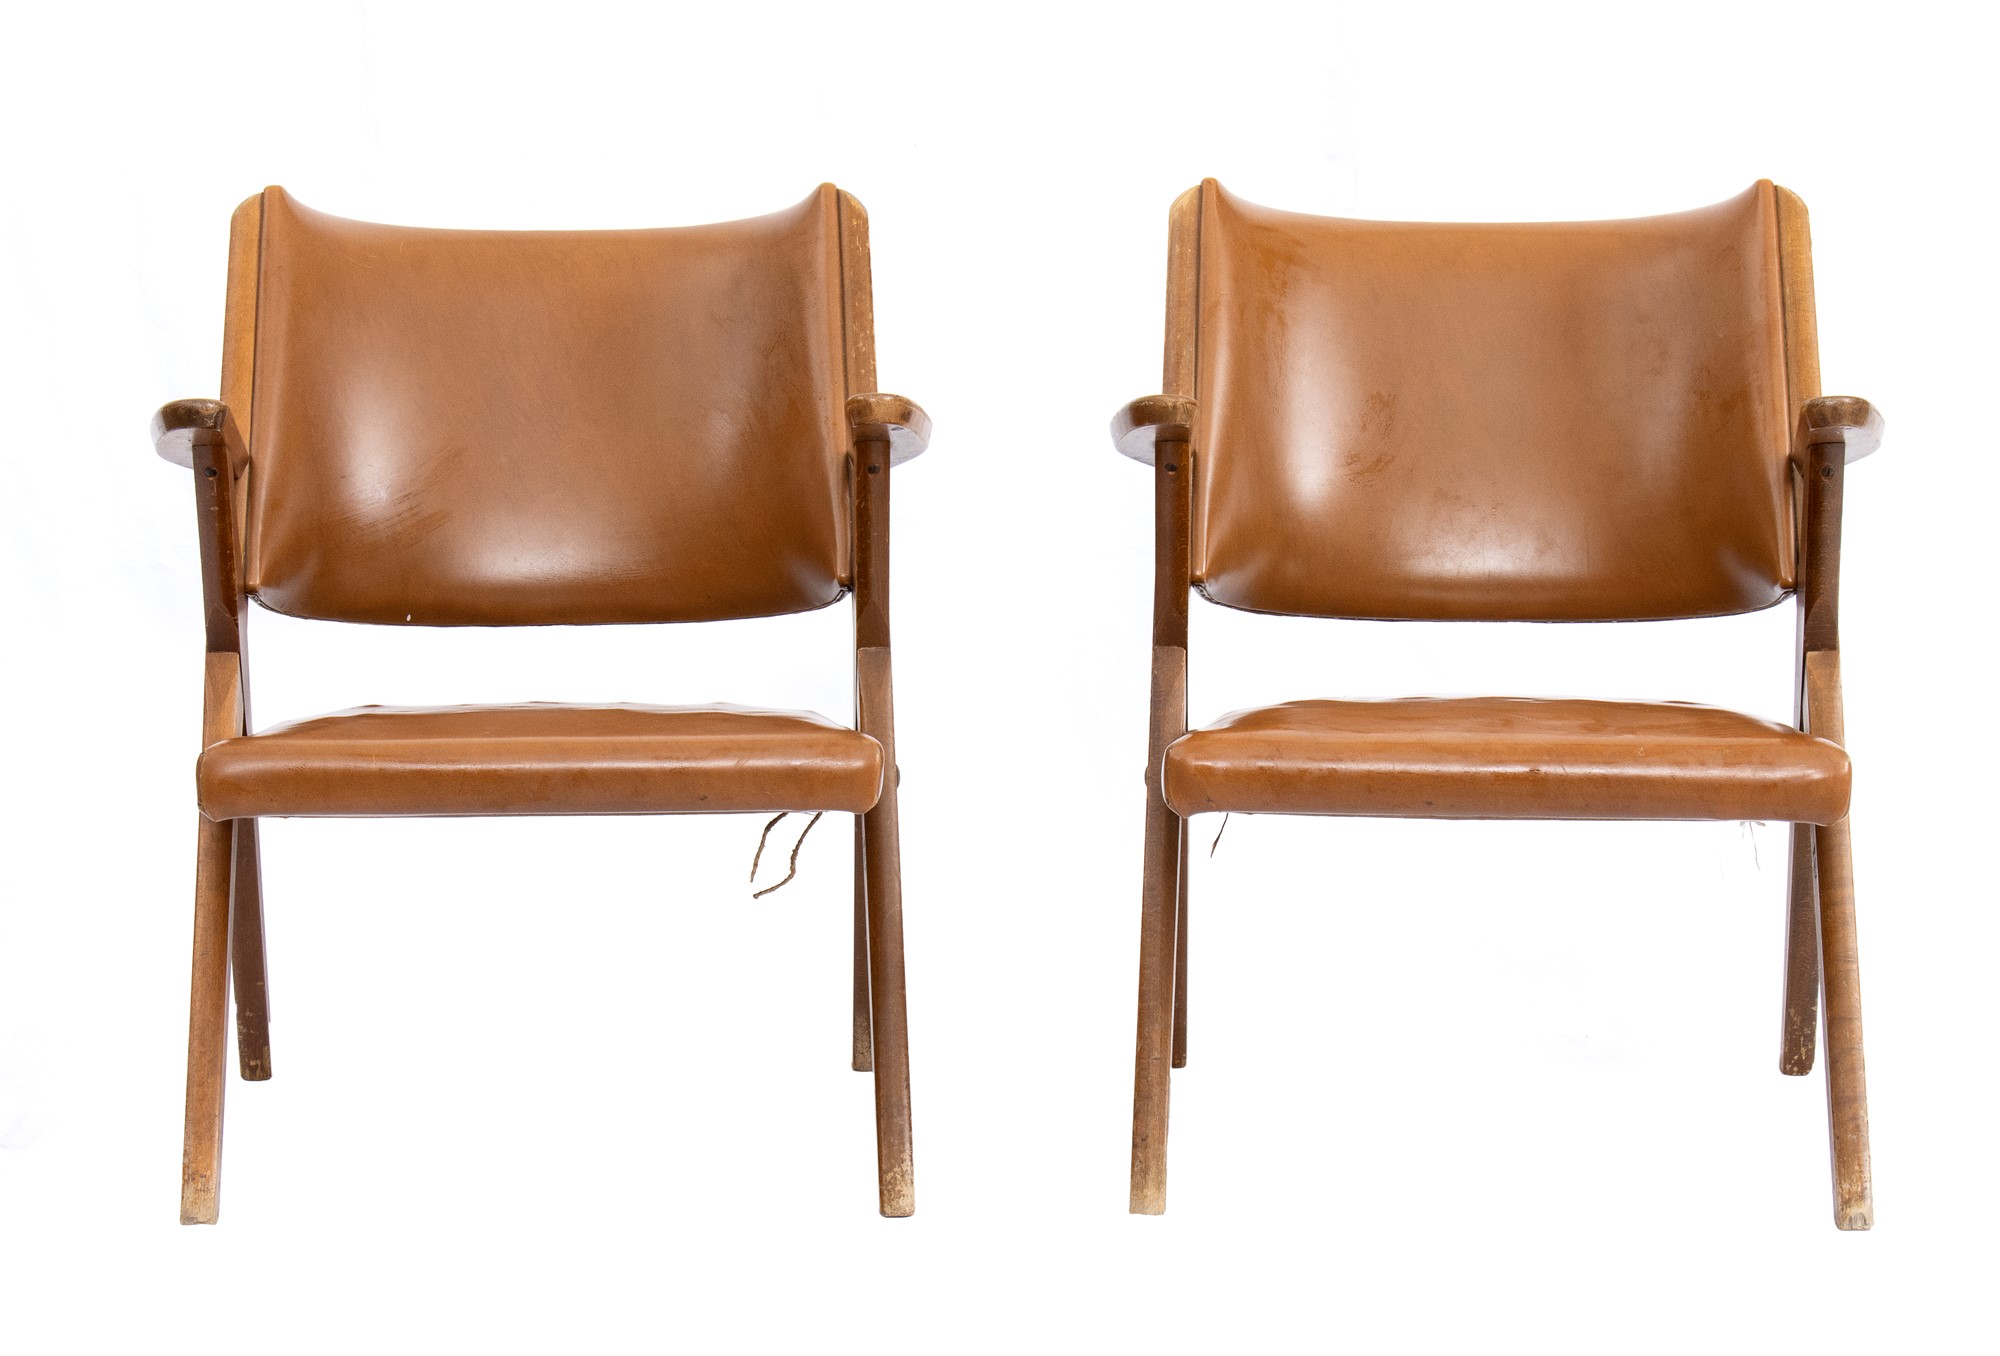 Dal Vera pair of armchairs with upholstered leather seats and backs - Image 3 of 17